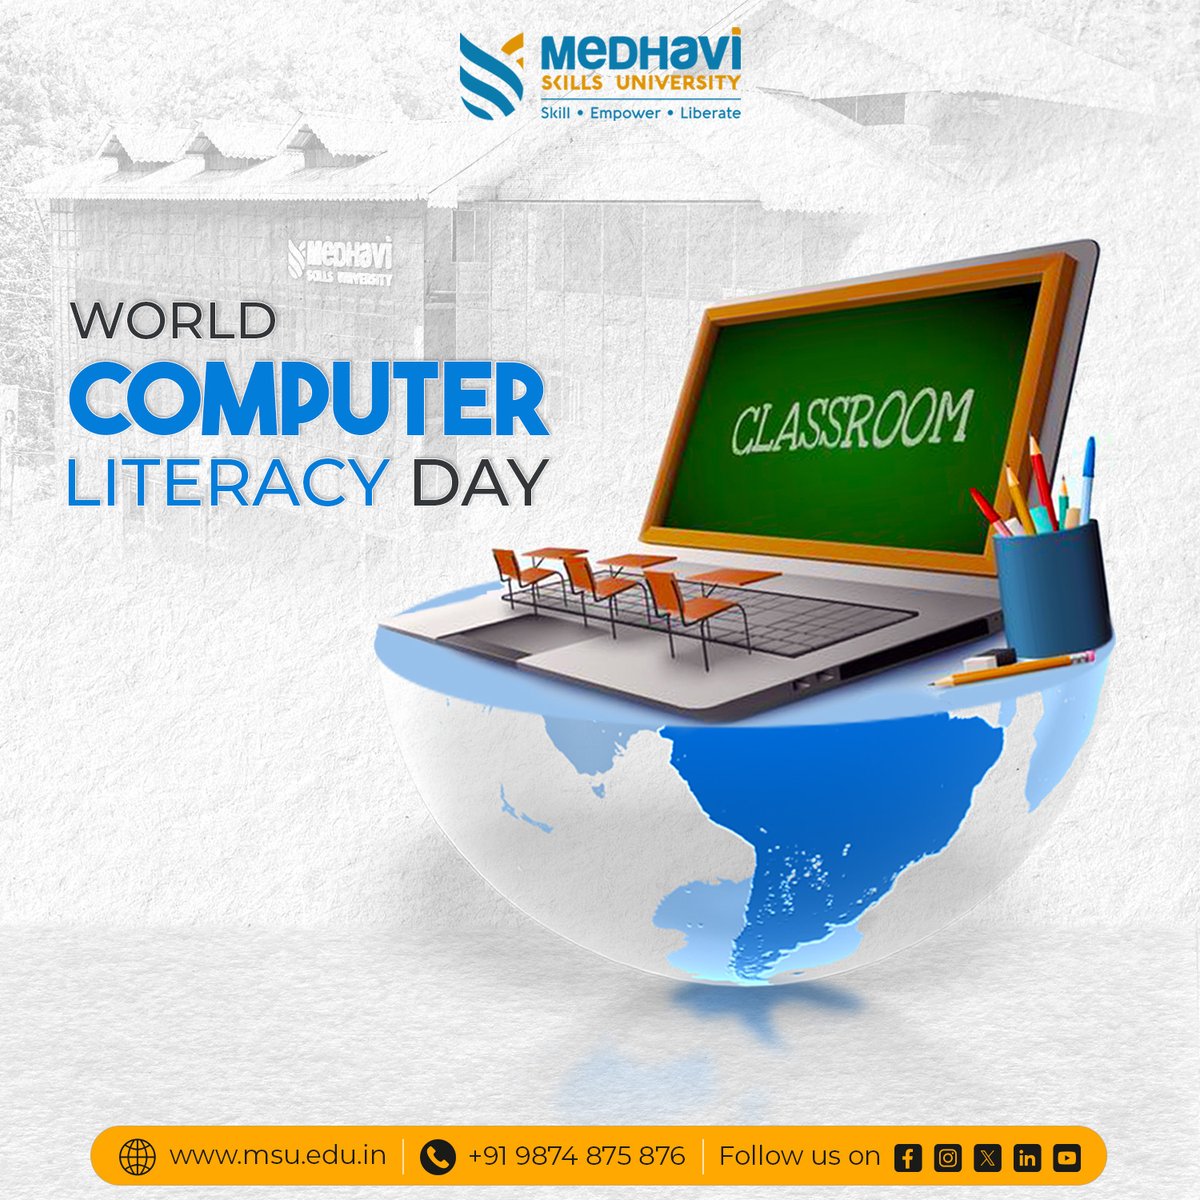 Empowering minds through knowledge on World Computer Literacy Day! Join us at Medhavi Skills University as we celebrate the journey of digital education, equipping minds for a tech-driven world. 💻📚

#ComputerLiteracy #DigitalEducation #EmpoweringMinds #MSU